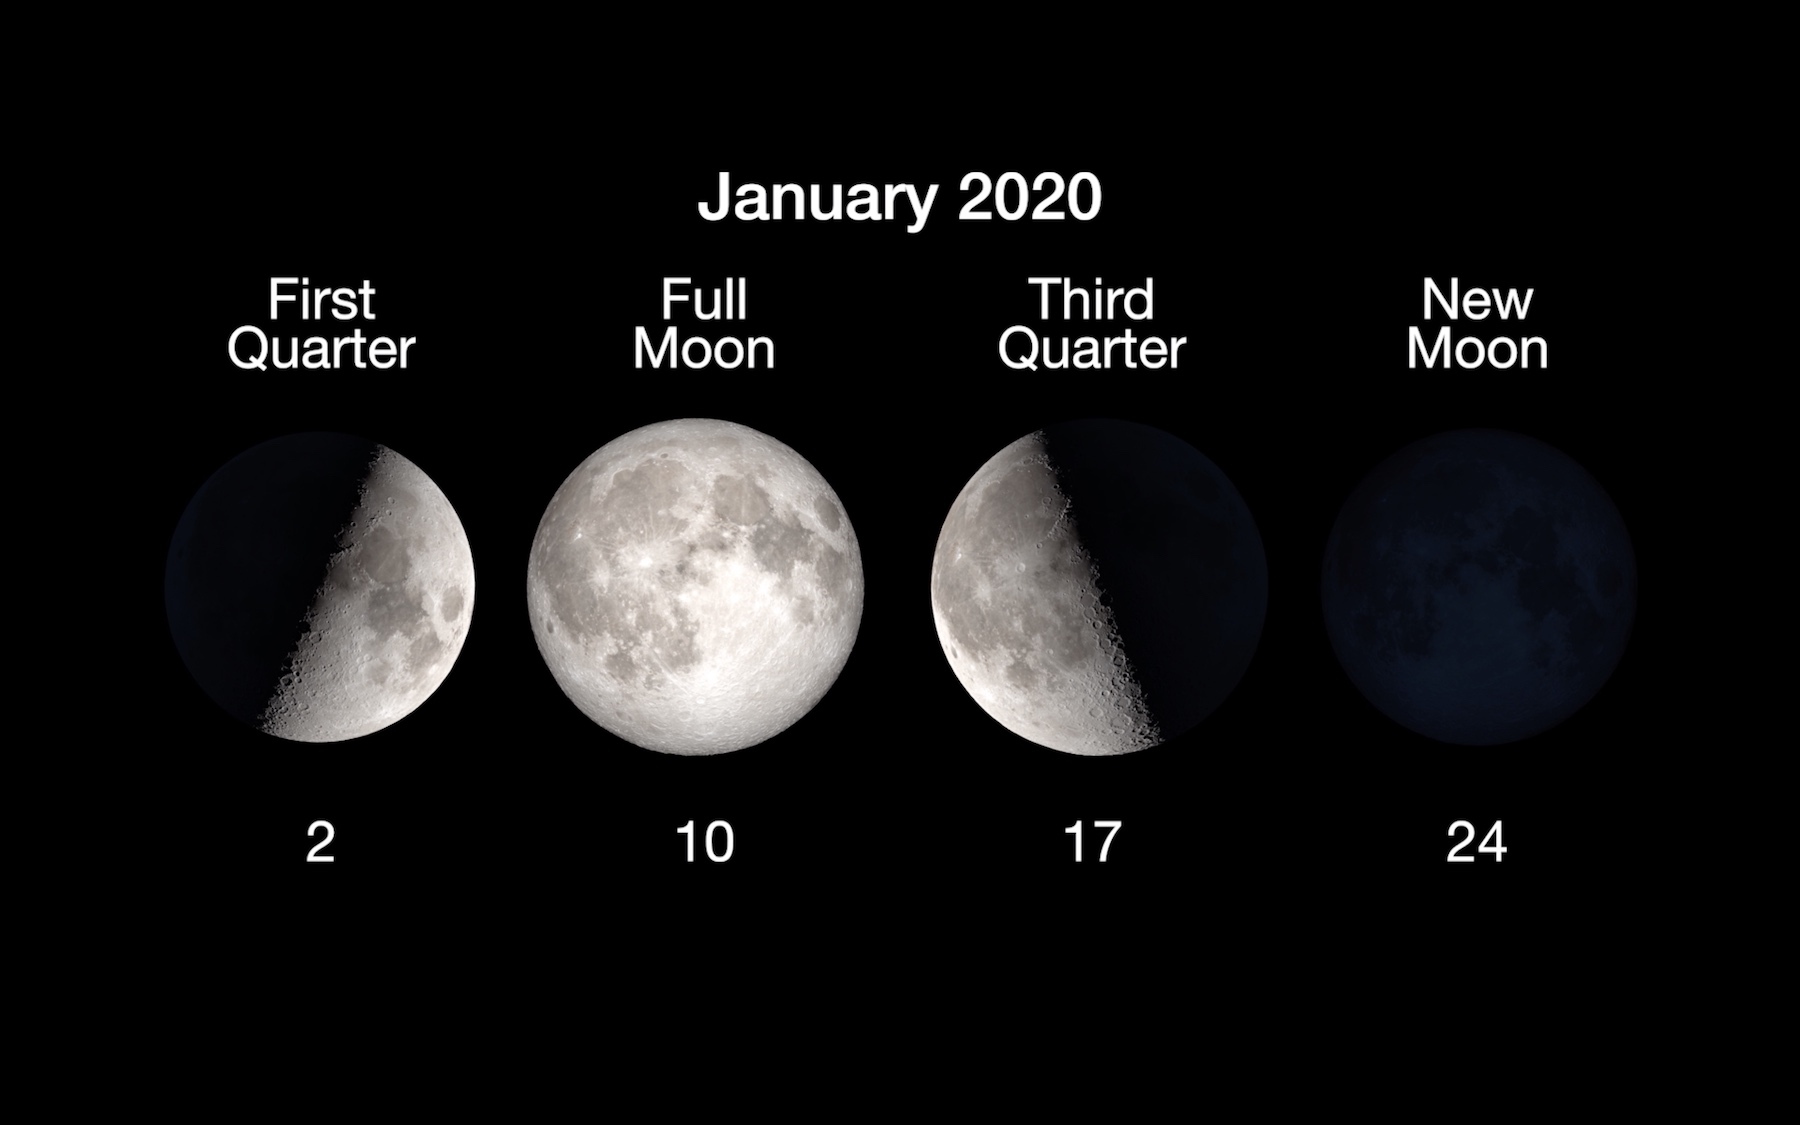 chart showing different amounts of illumination of the moon